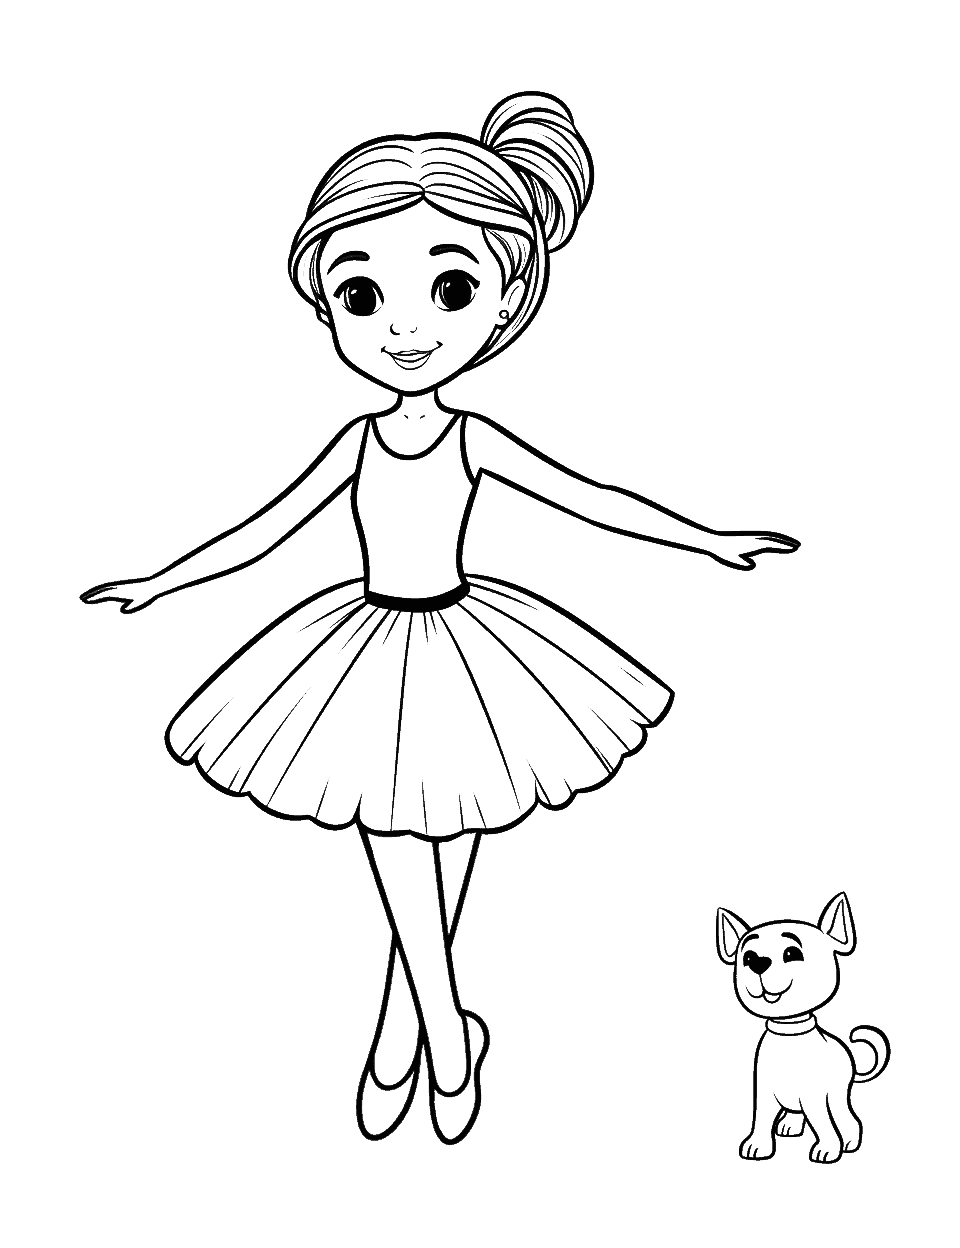 Ballerina With a Puppy Coloring Page - A young ballerina practicing her dance moves with a cute puppy watching her.